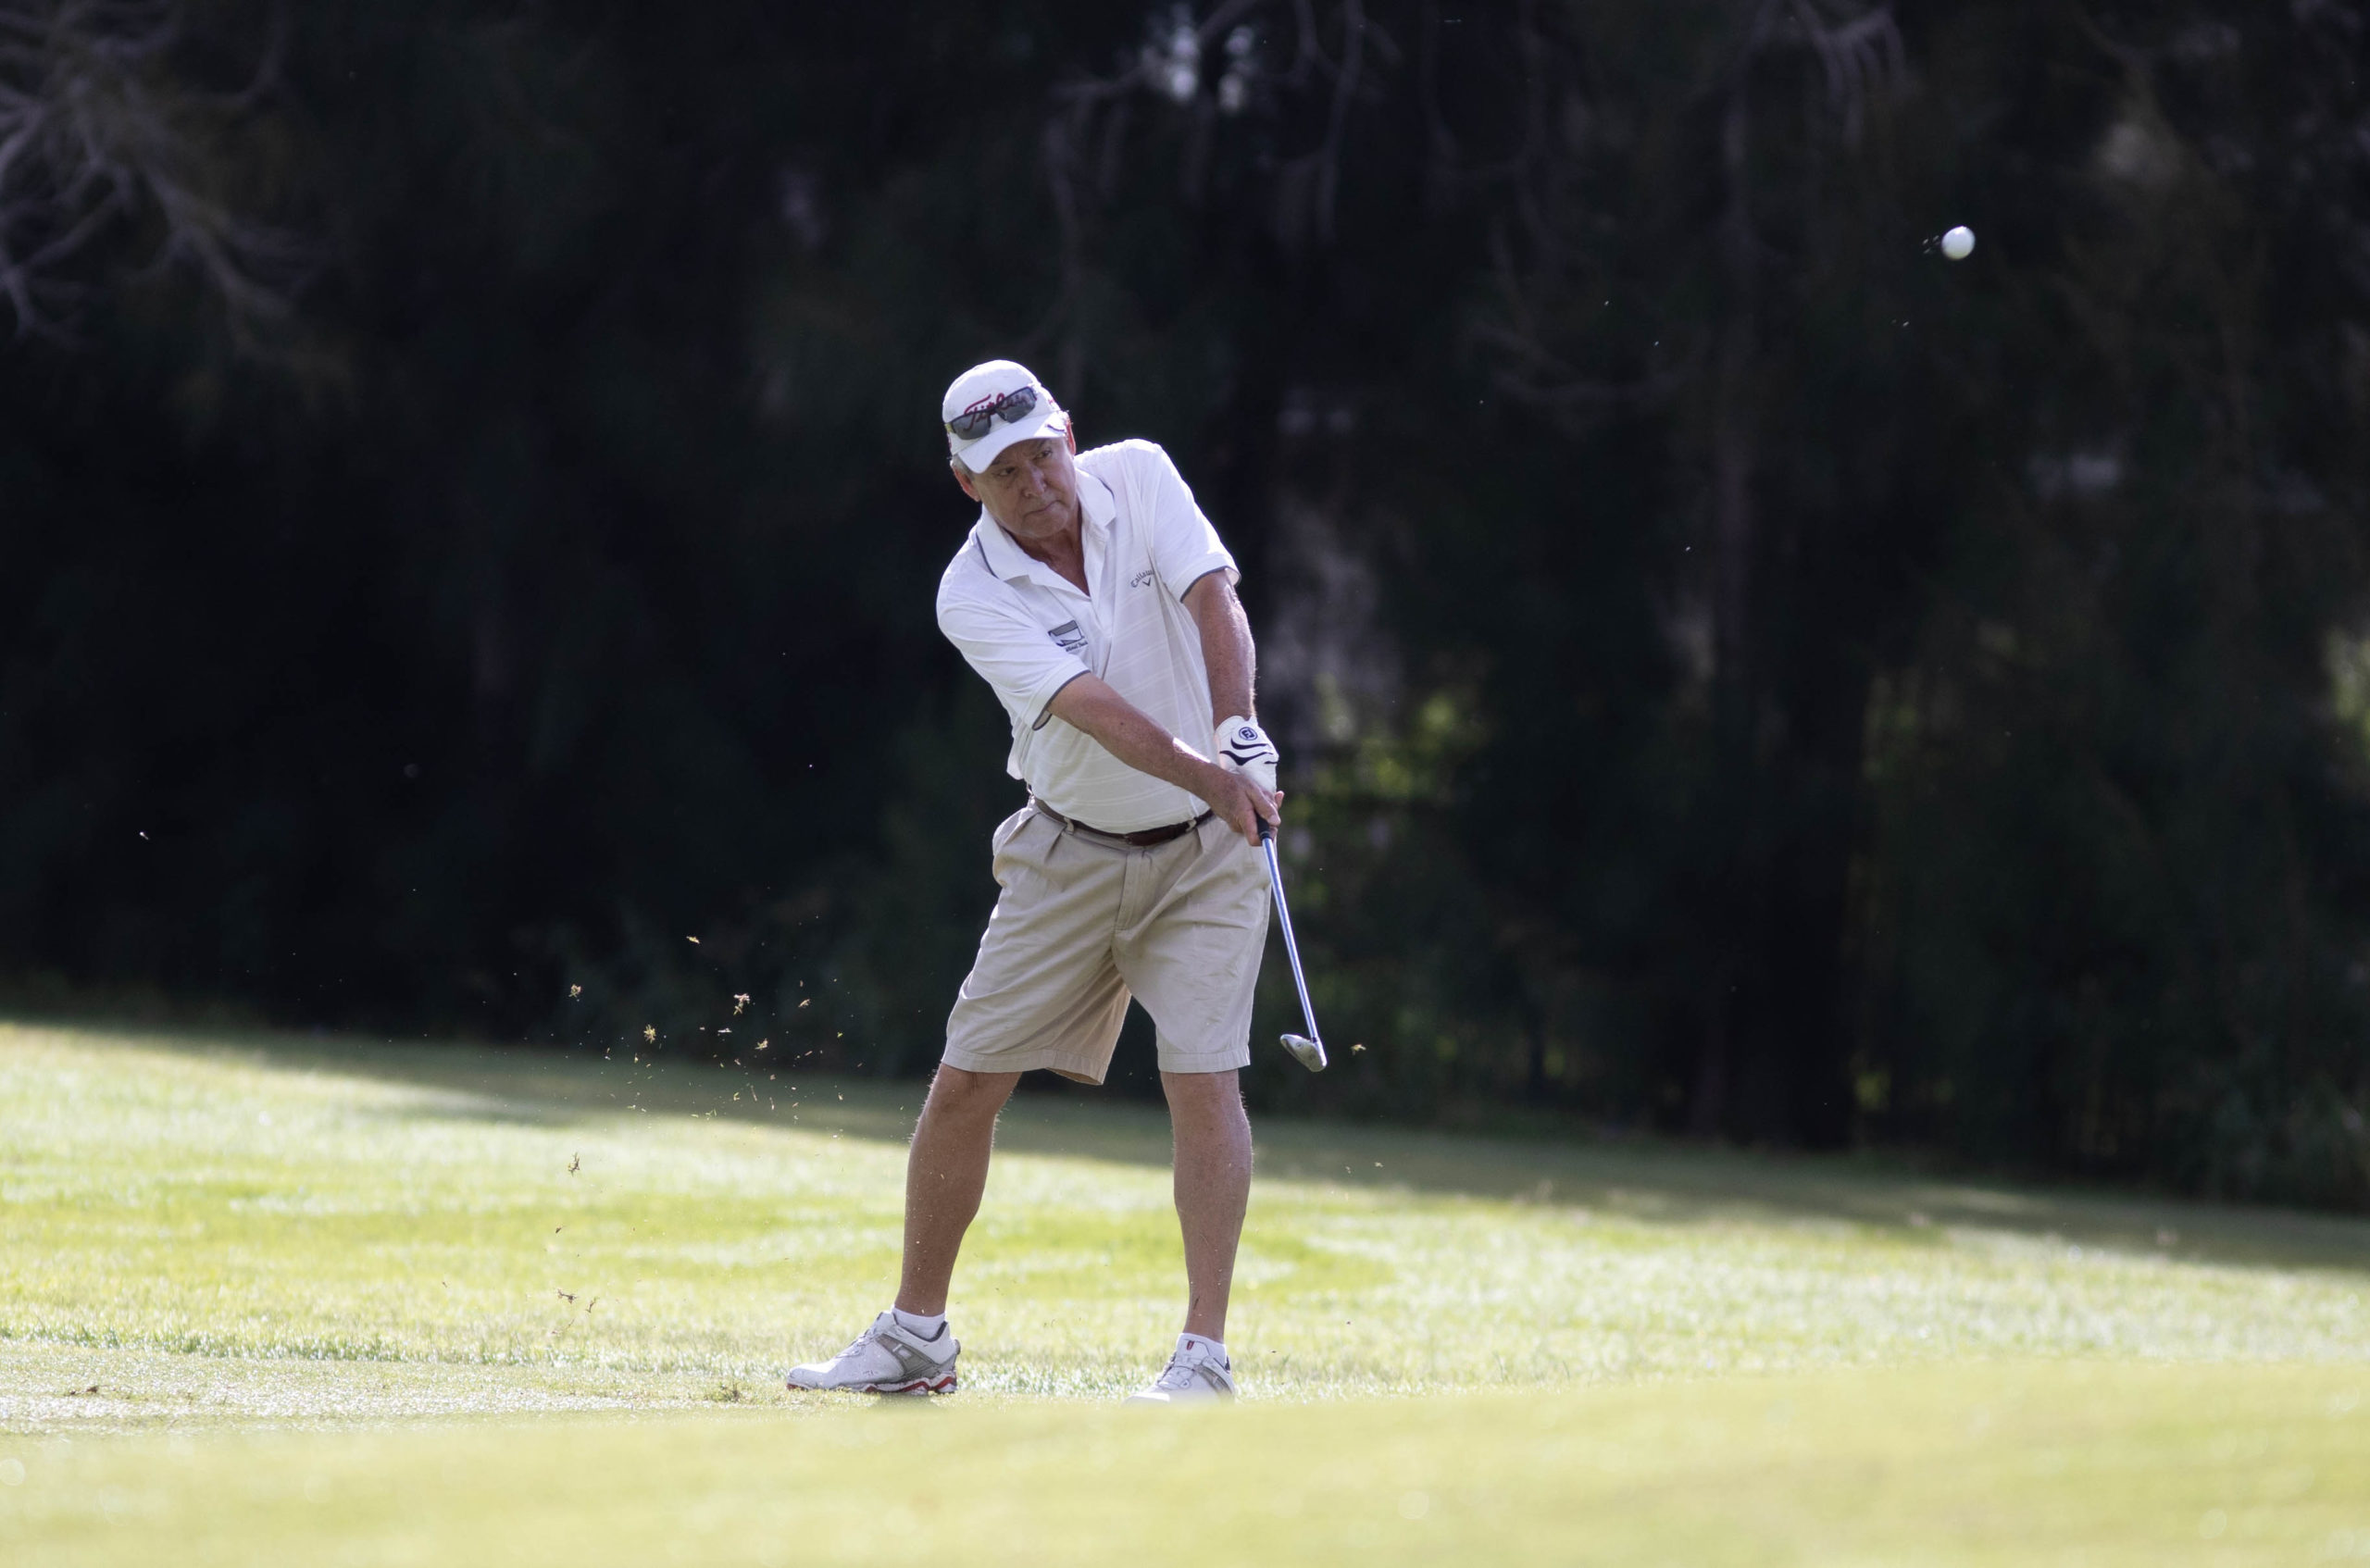 Second Annual Scorpion Classic Golf Tournament at Rancho Viejo Resort & Country Club